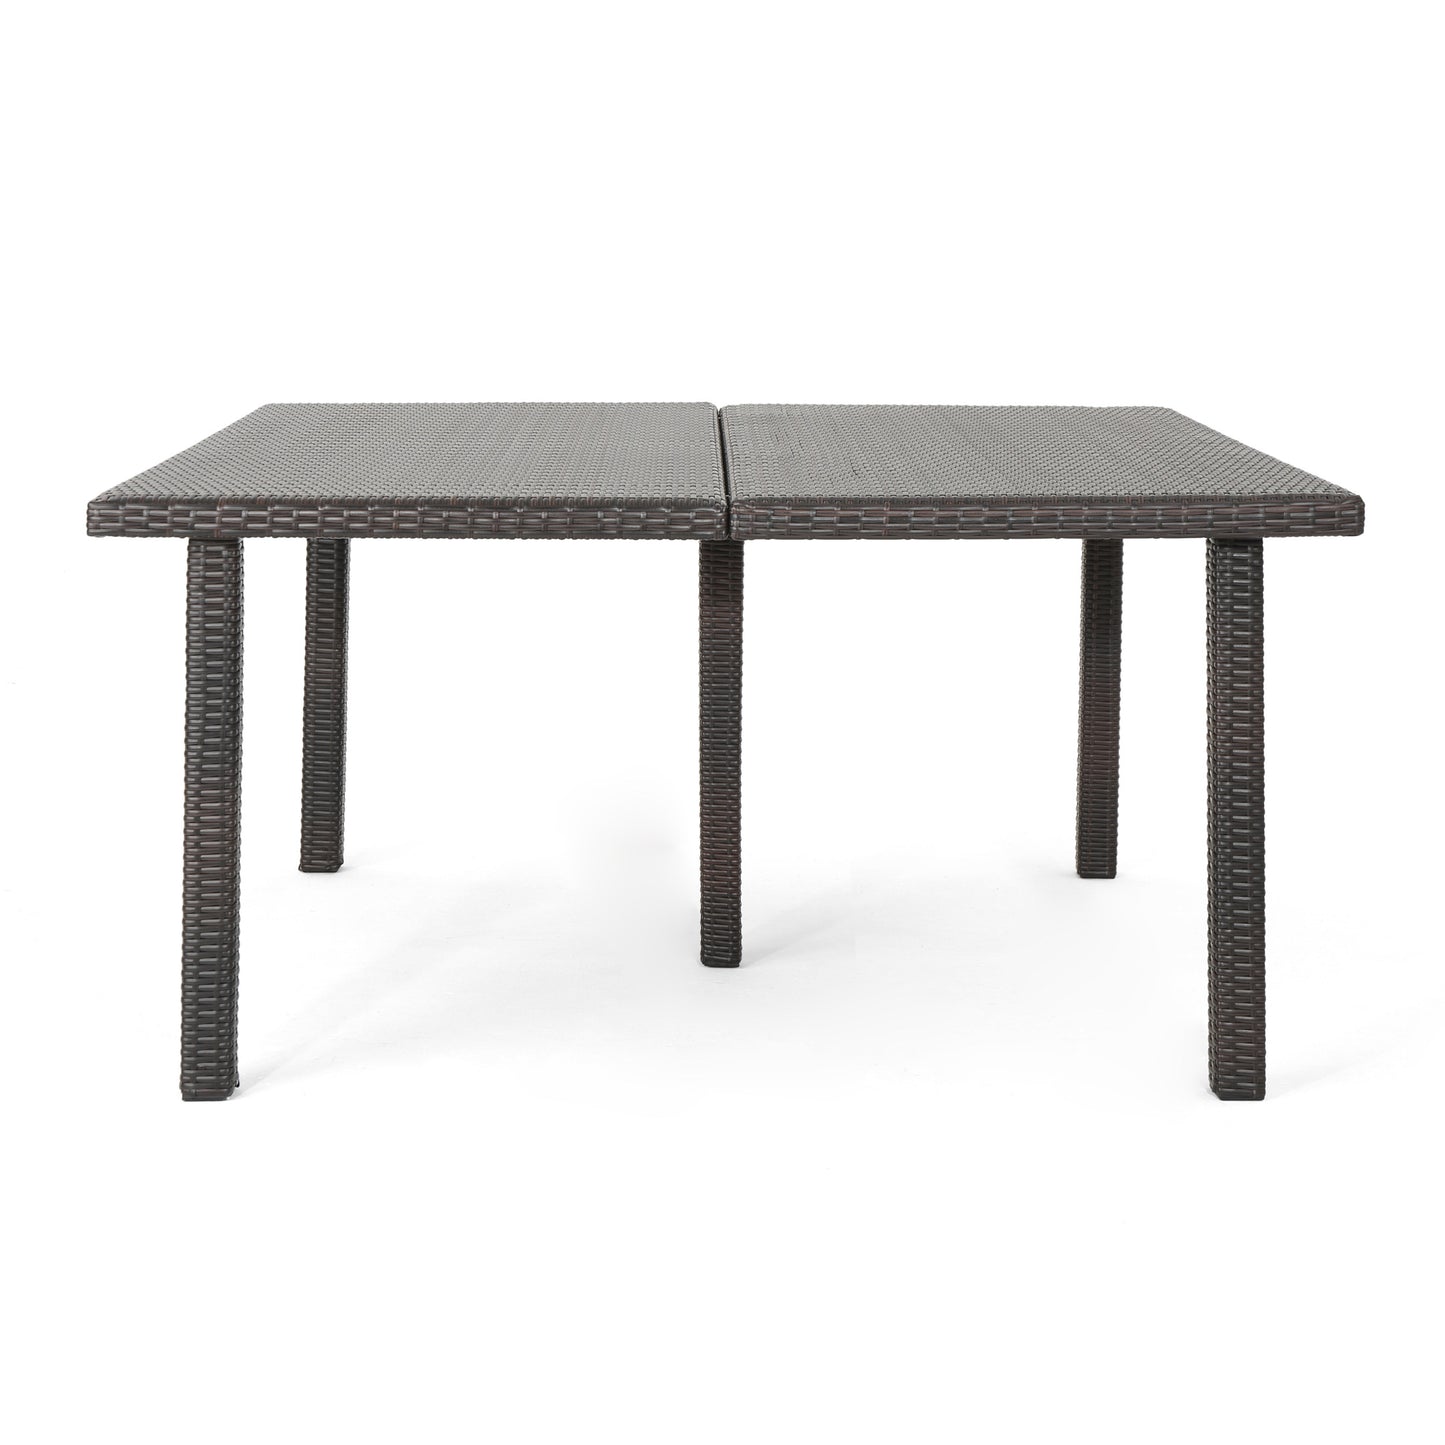 Fern Outdoor 64 Inch Wicker Square Dining Table